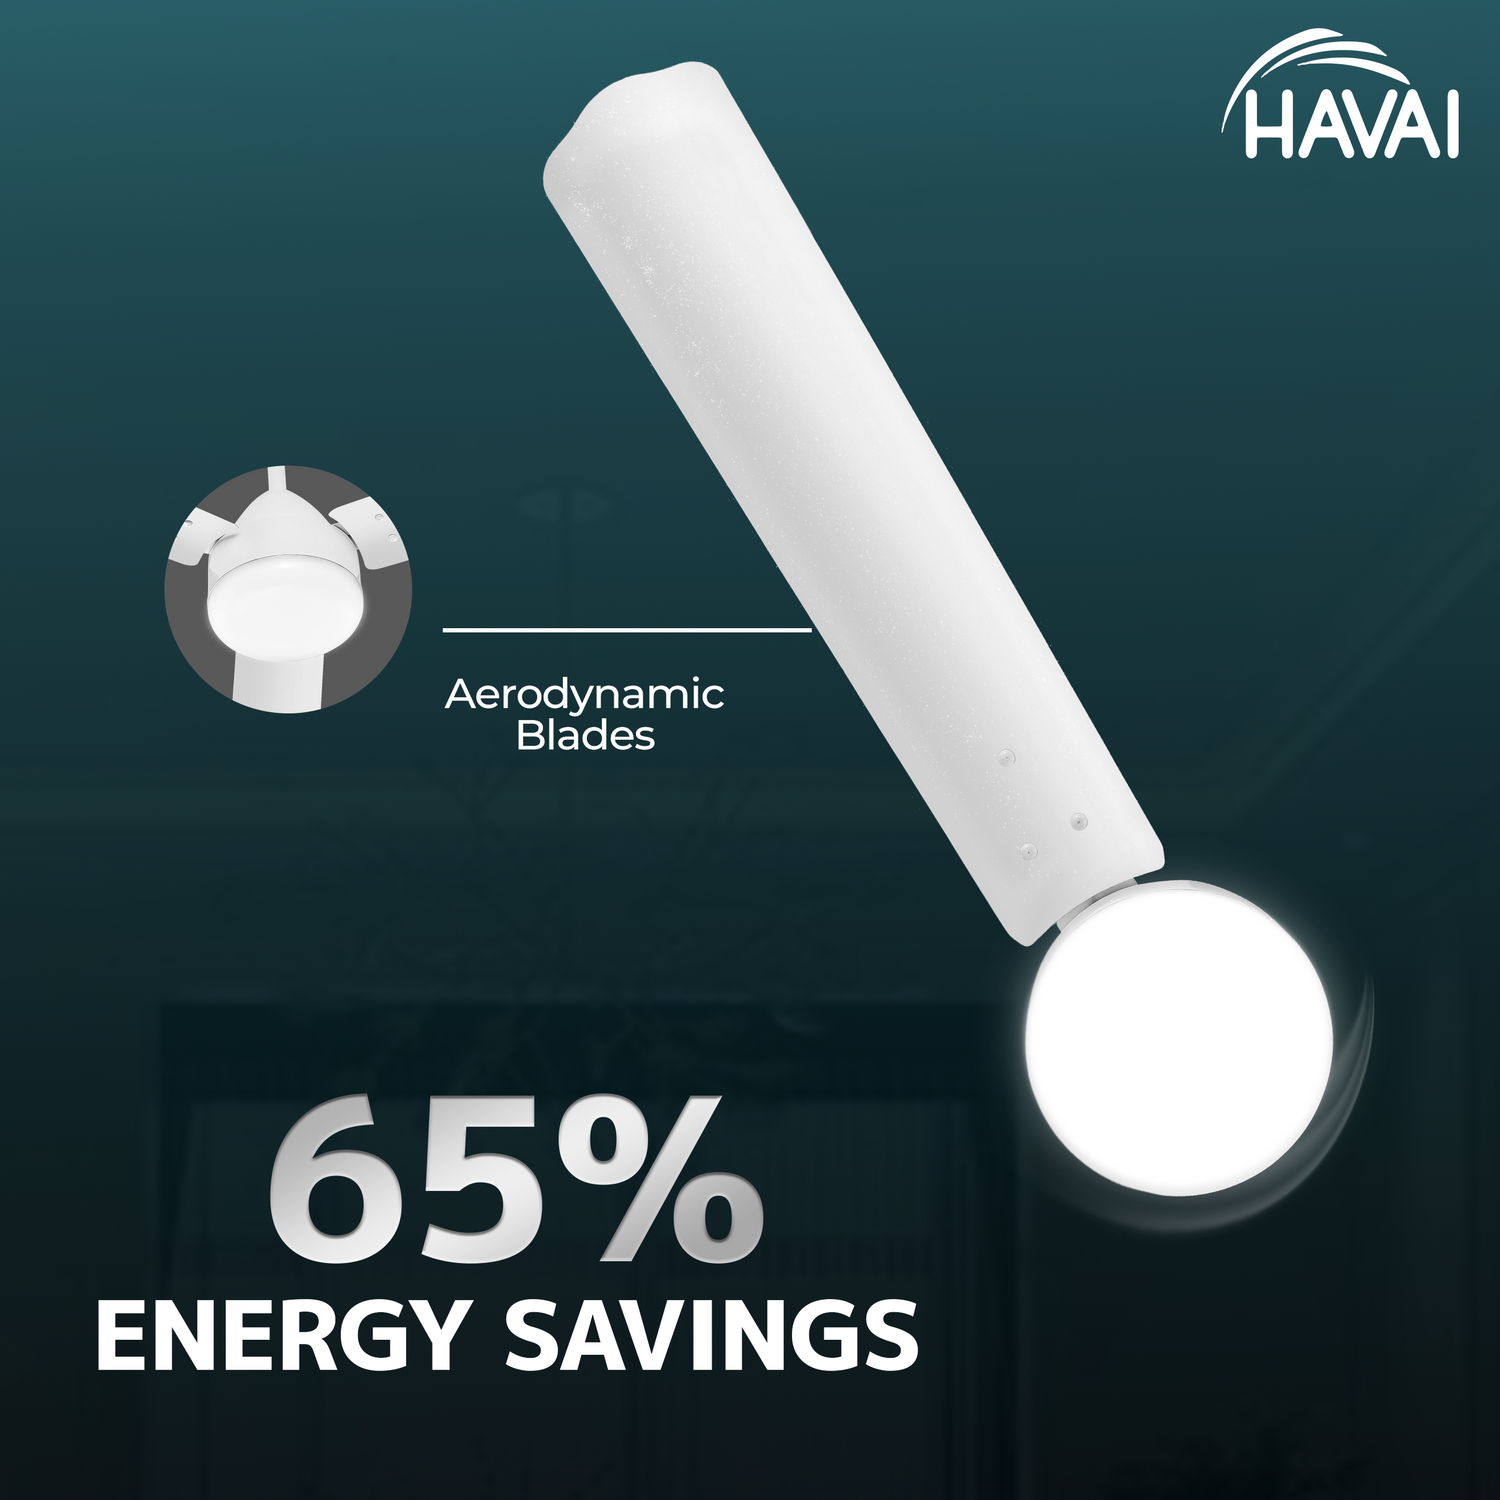 HAVAI Spinel BLDC Ceiling Fan 28W, 1200mm Blade with Remote - Pearl White,0.5W LED